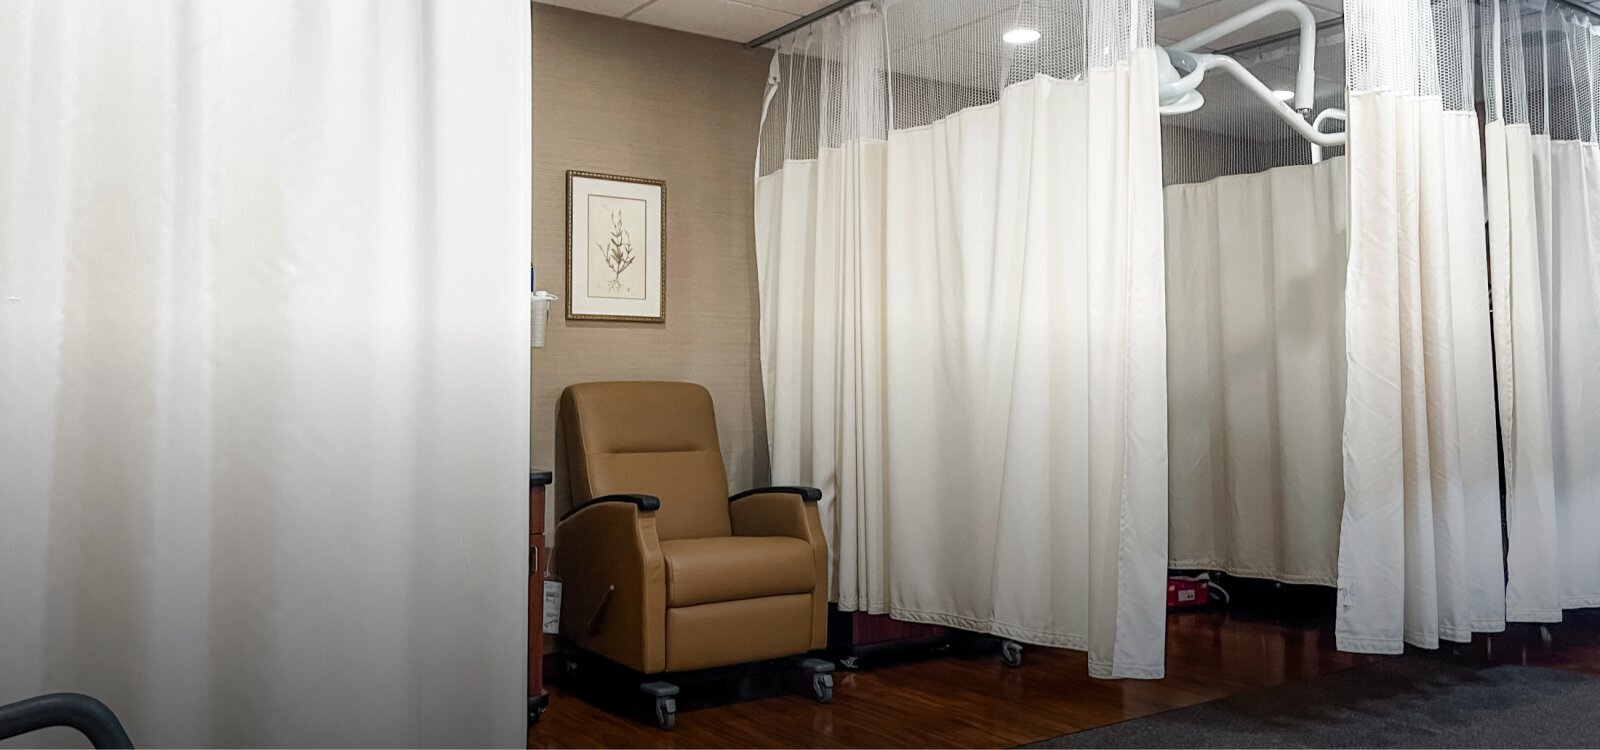 Marotta Plastic Surgery Specialists recovery room